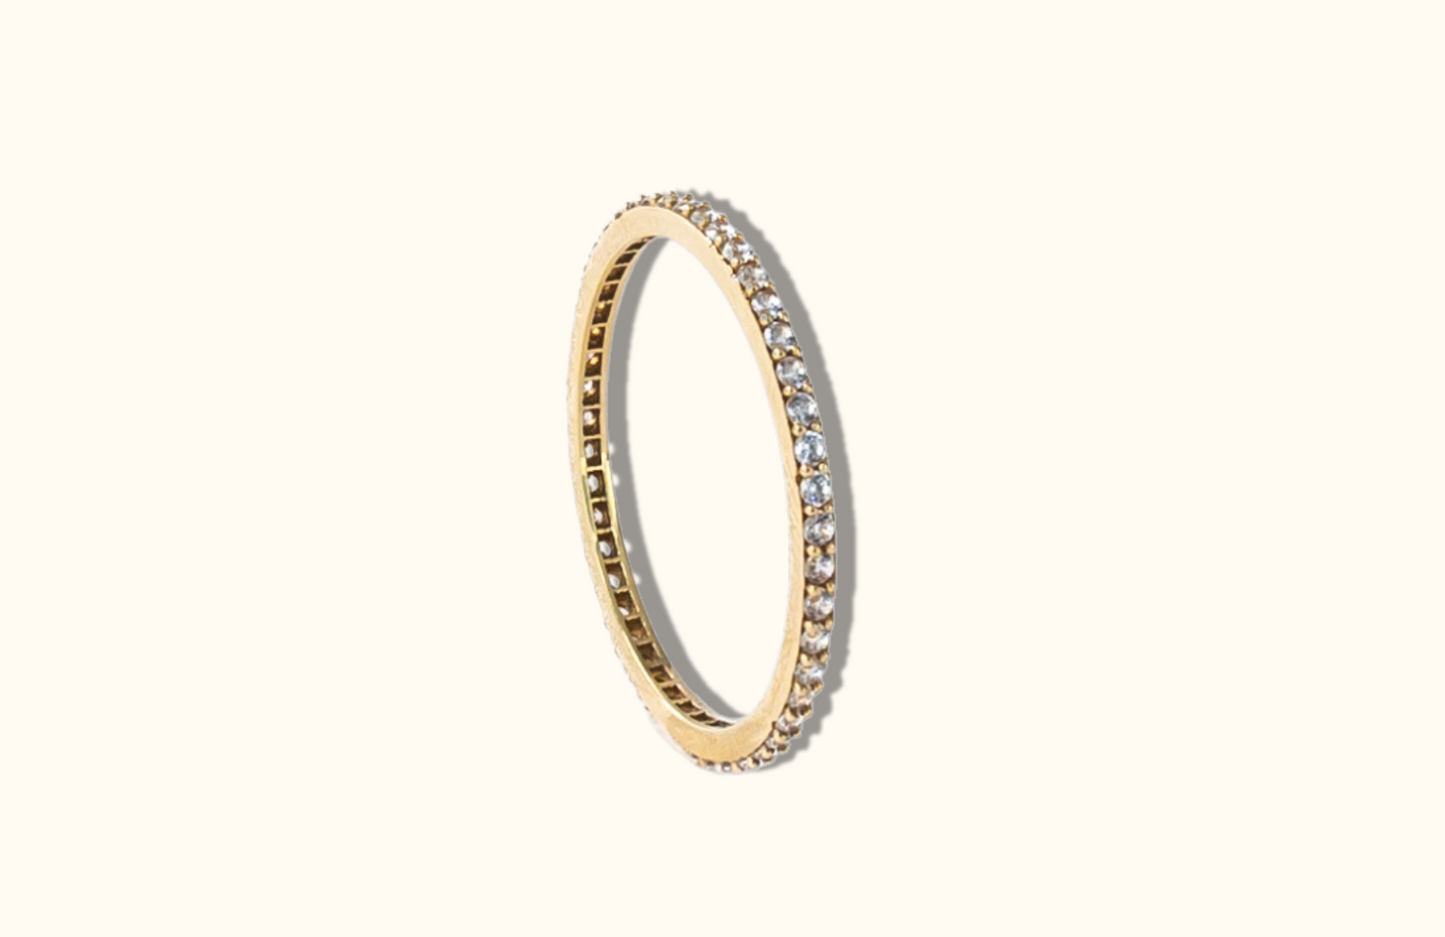 10k gold eternity ring with cubic zirconia